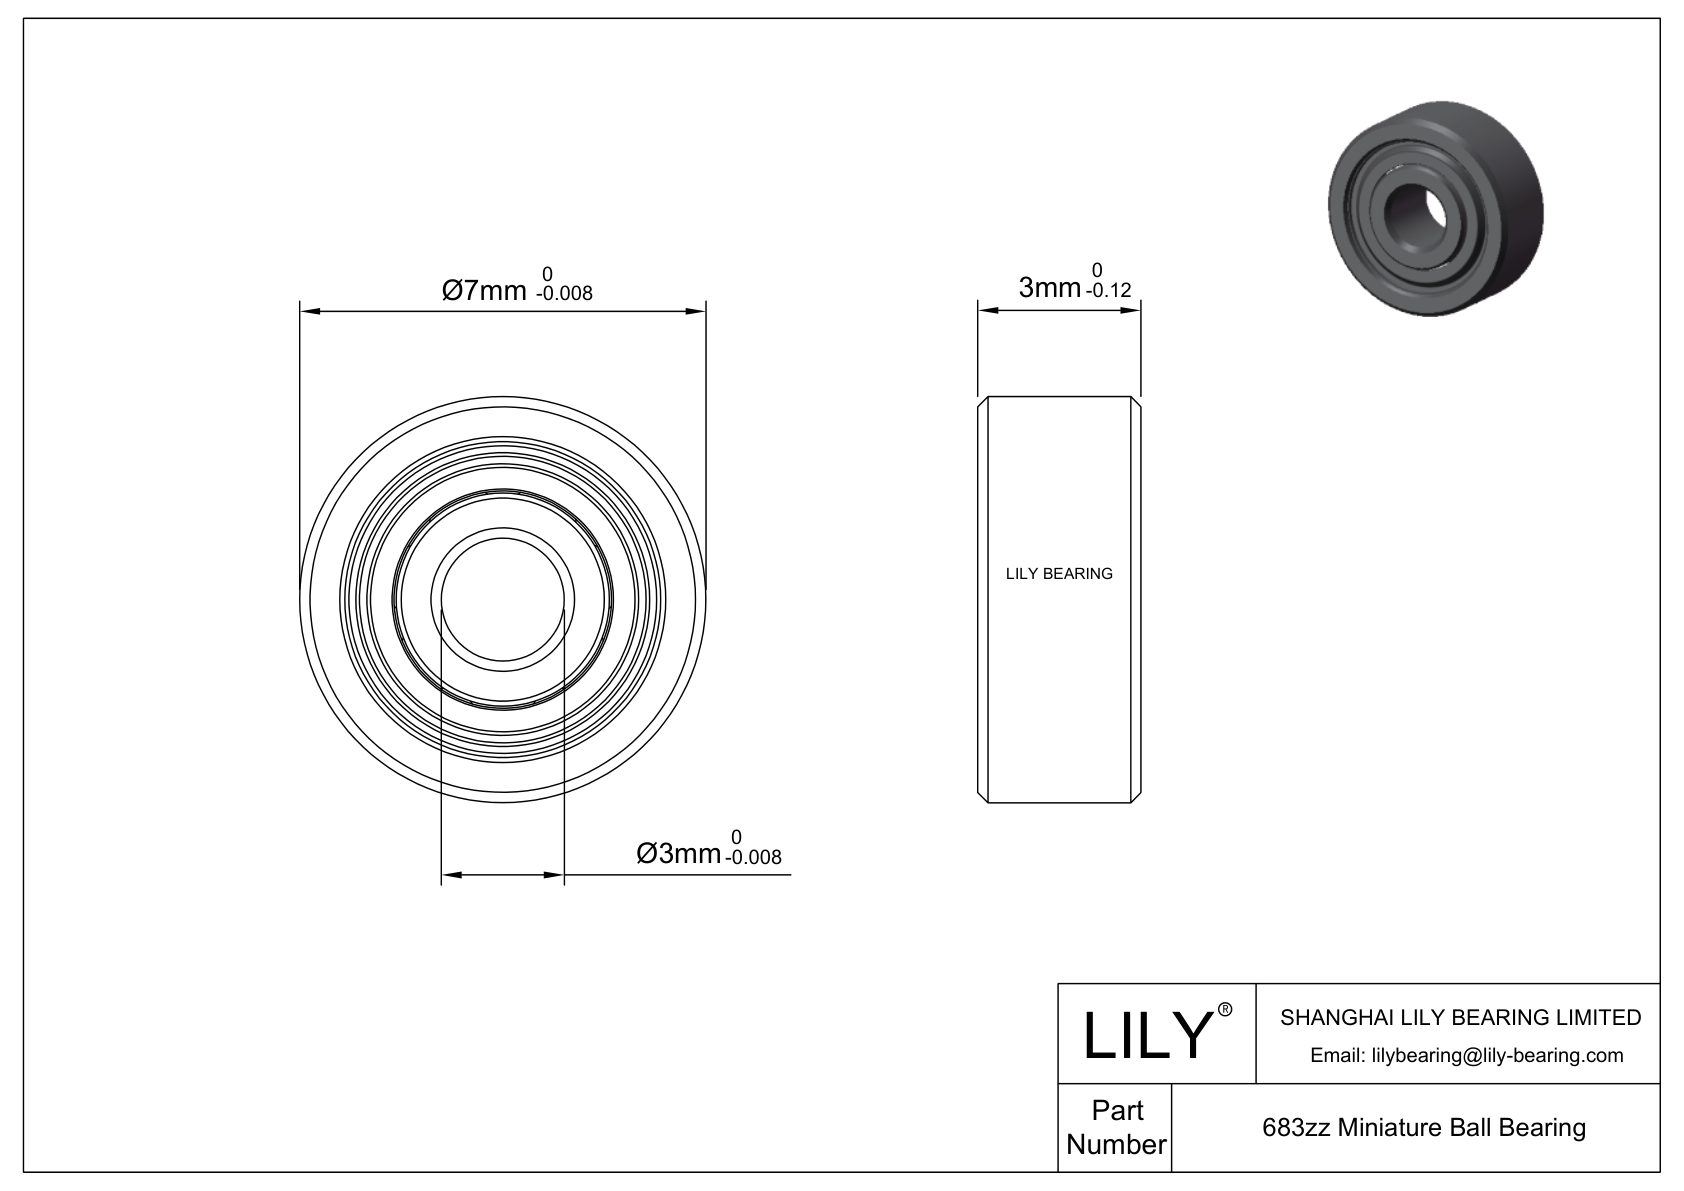 LILY-BS68310-3 POM Coated Bearing cad drawing